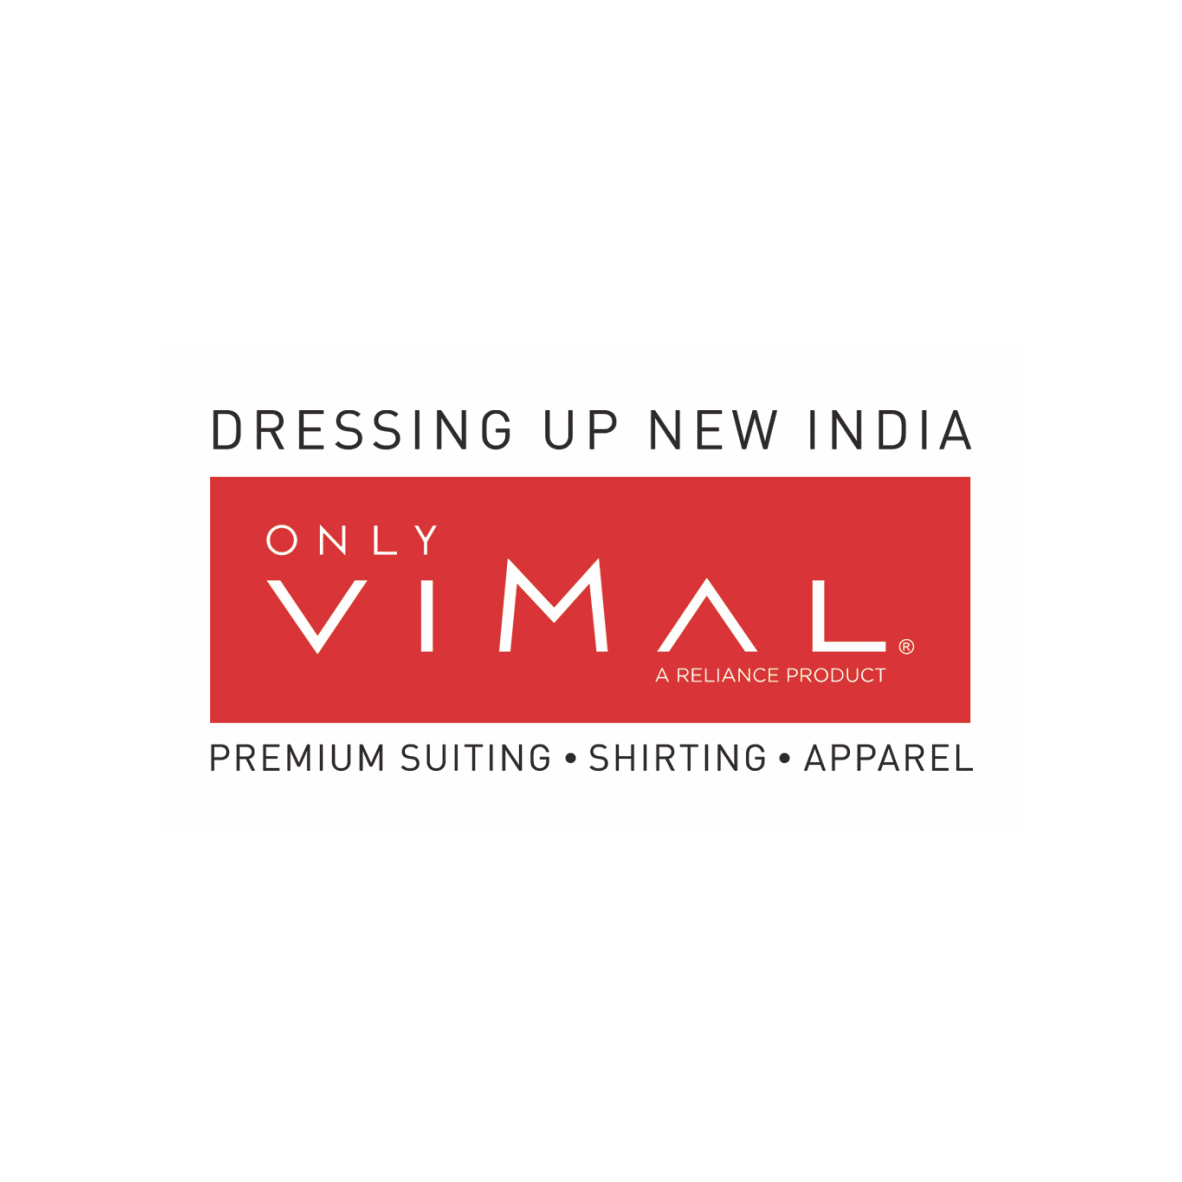 Logo of our client Vimal